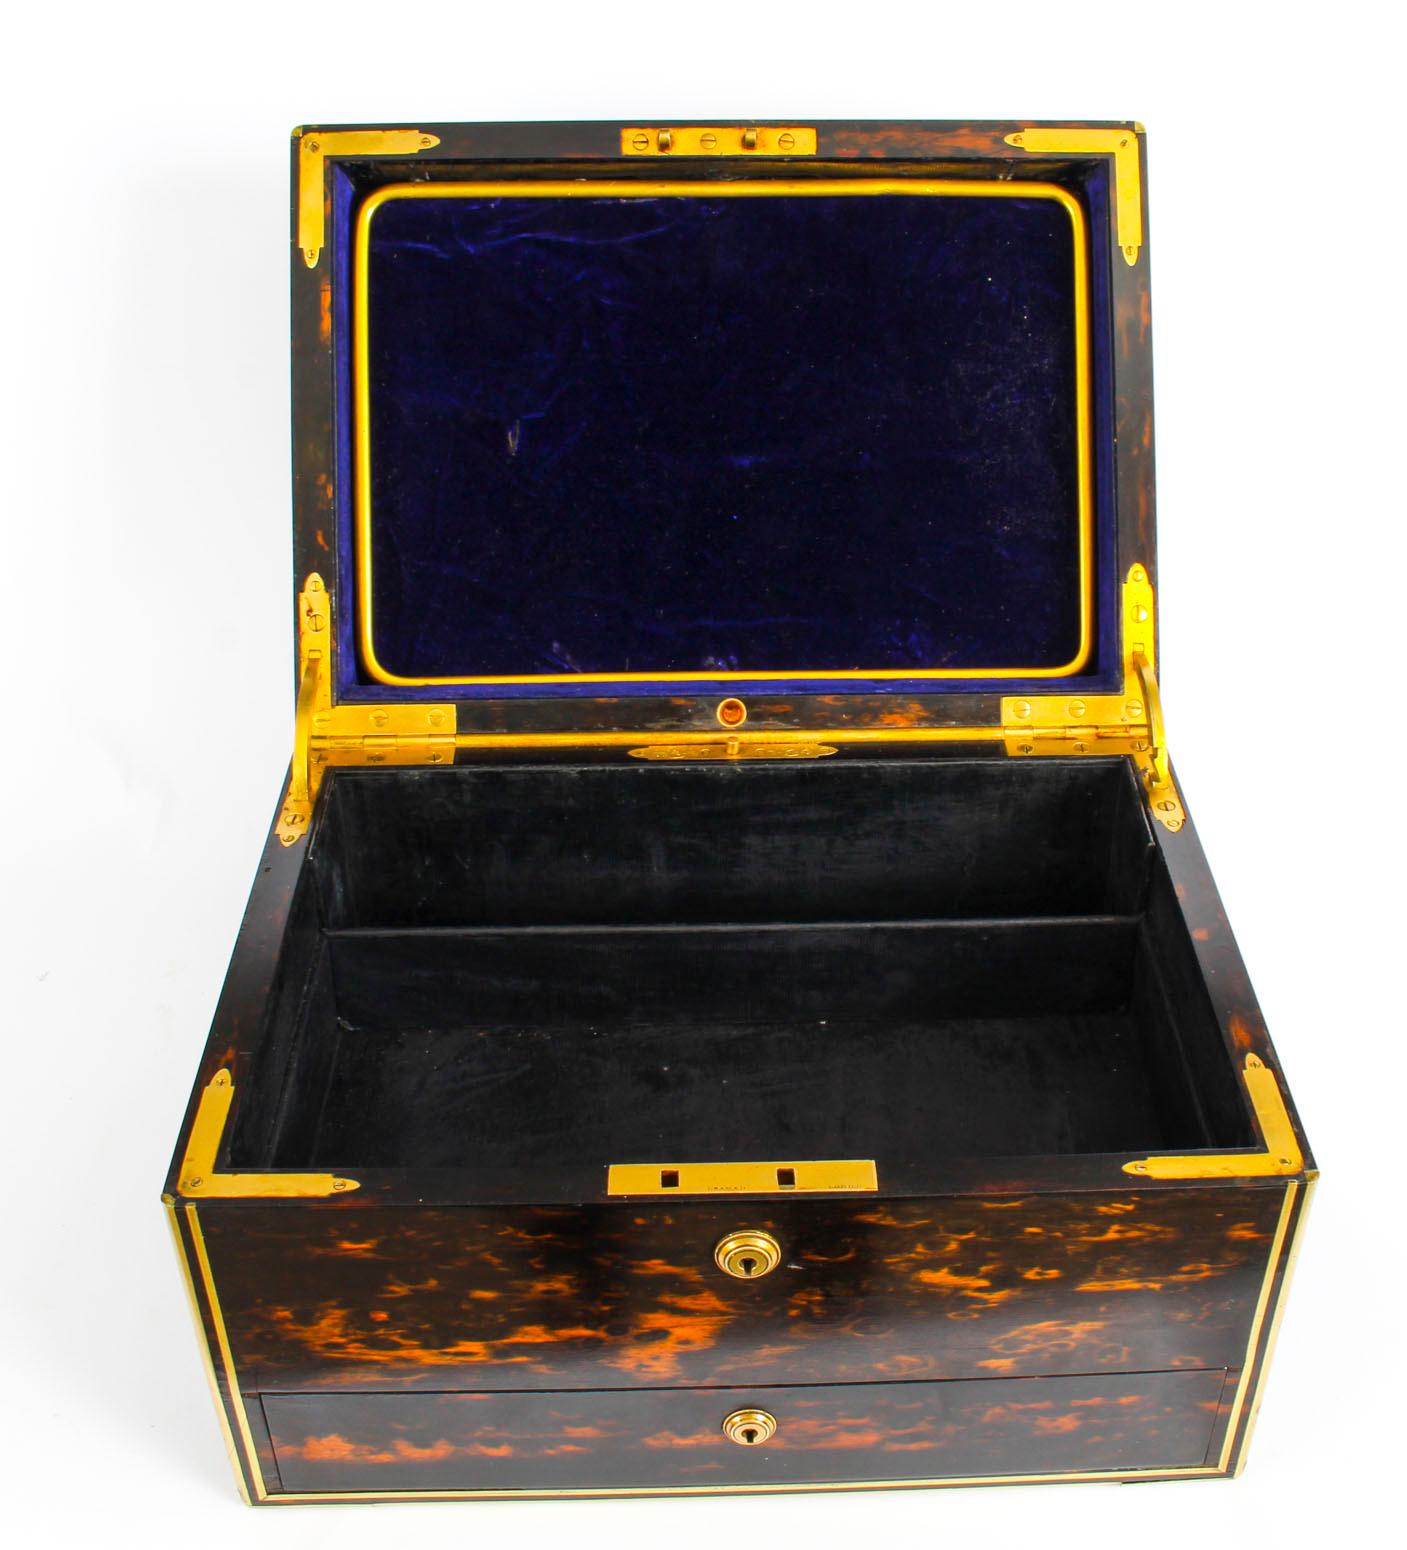 An elegant Victorian Coromandel and brass mounted jewellery box and dressing case by the renowned Victorian retailer Jenner Knewstub, of 33 St.James Street, London, and circa 1860 in date.

The rectangular top features double strung thick brass